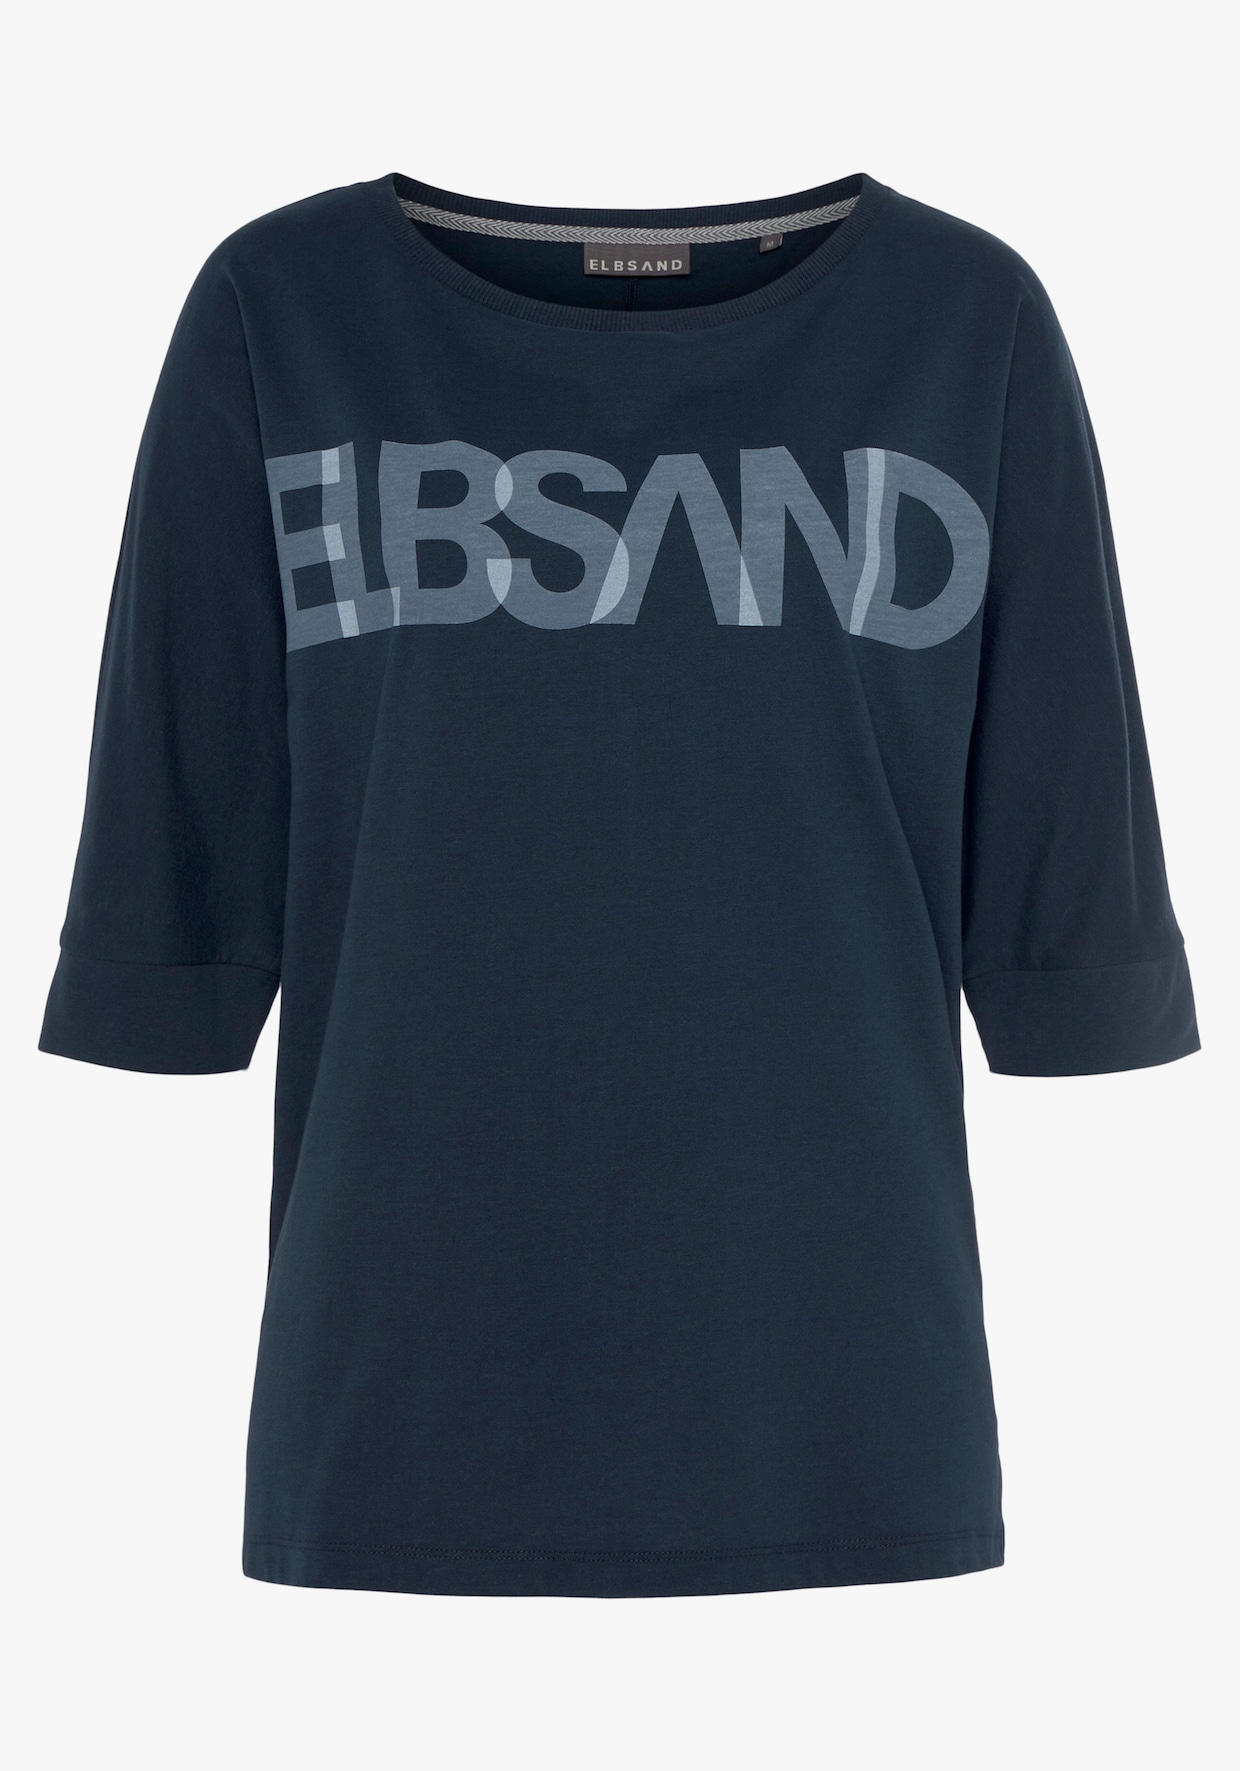 Elbsand 3/4-Arm-Shirt - coldwater